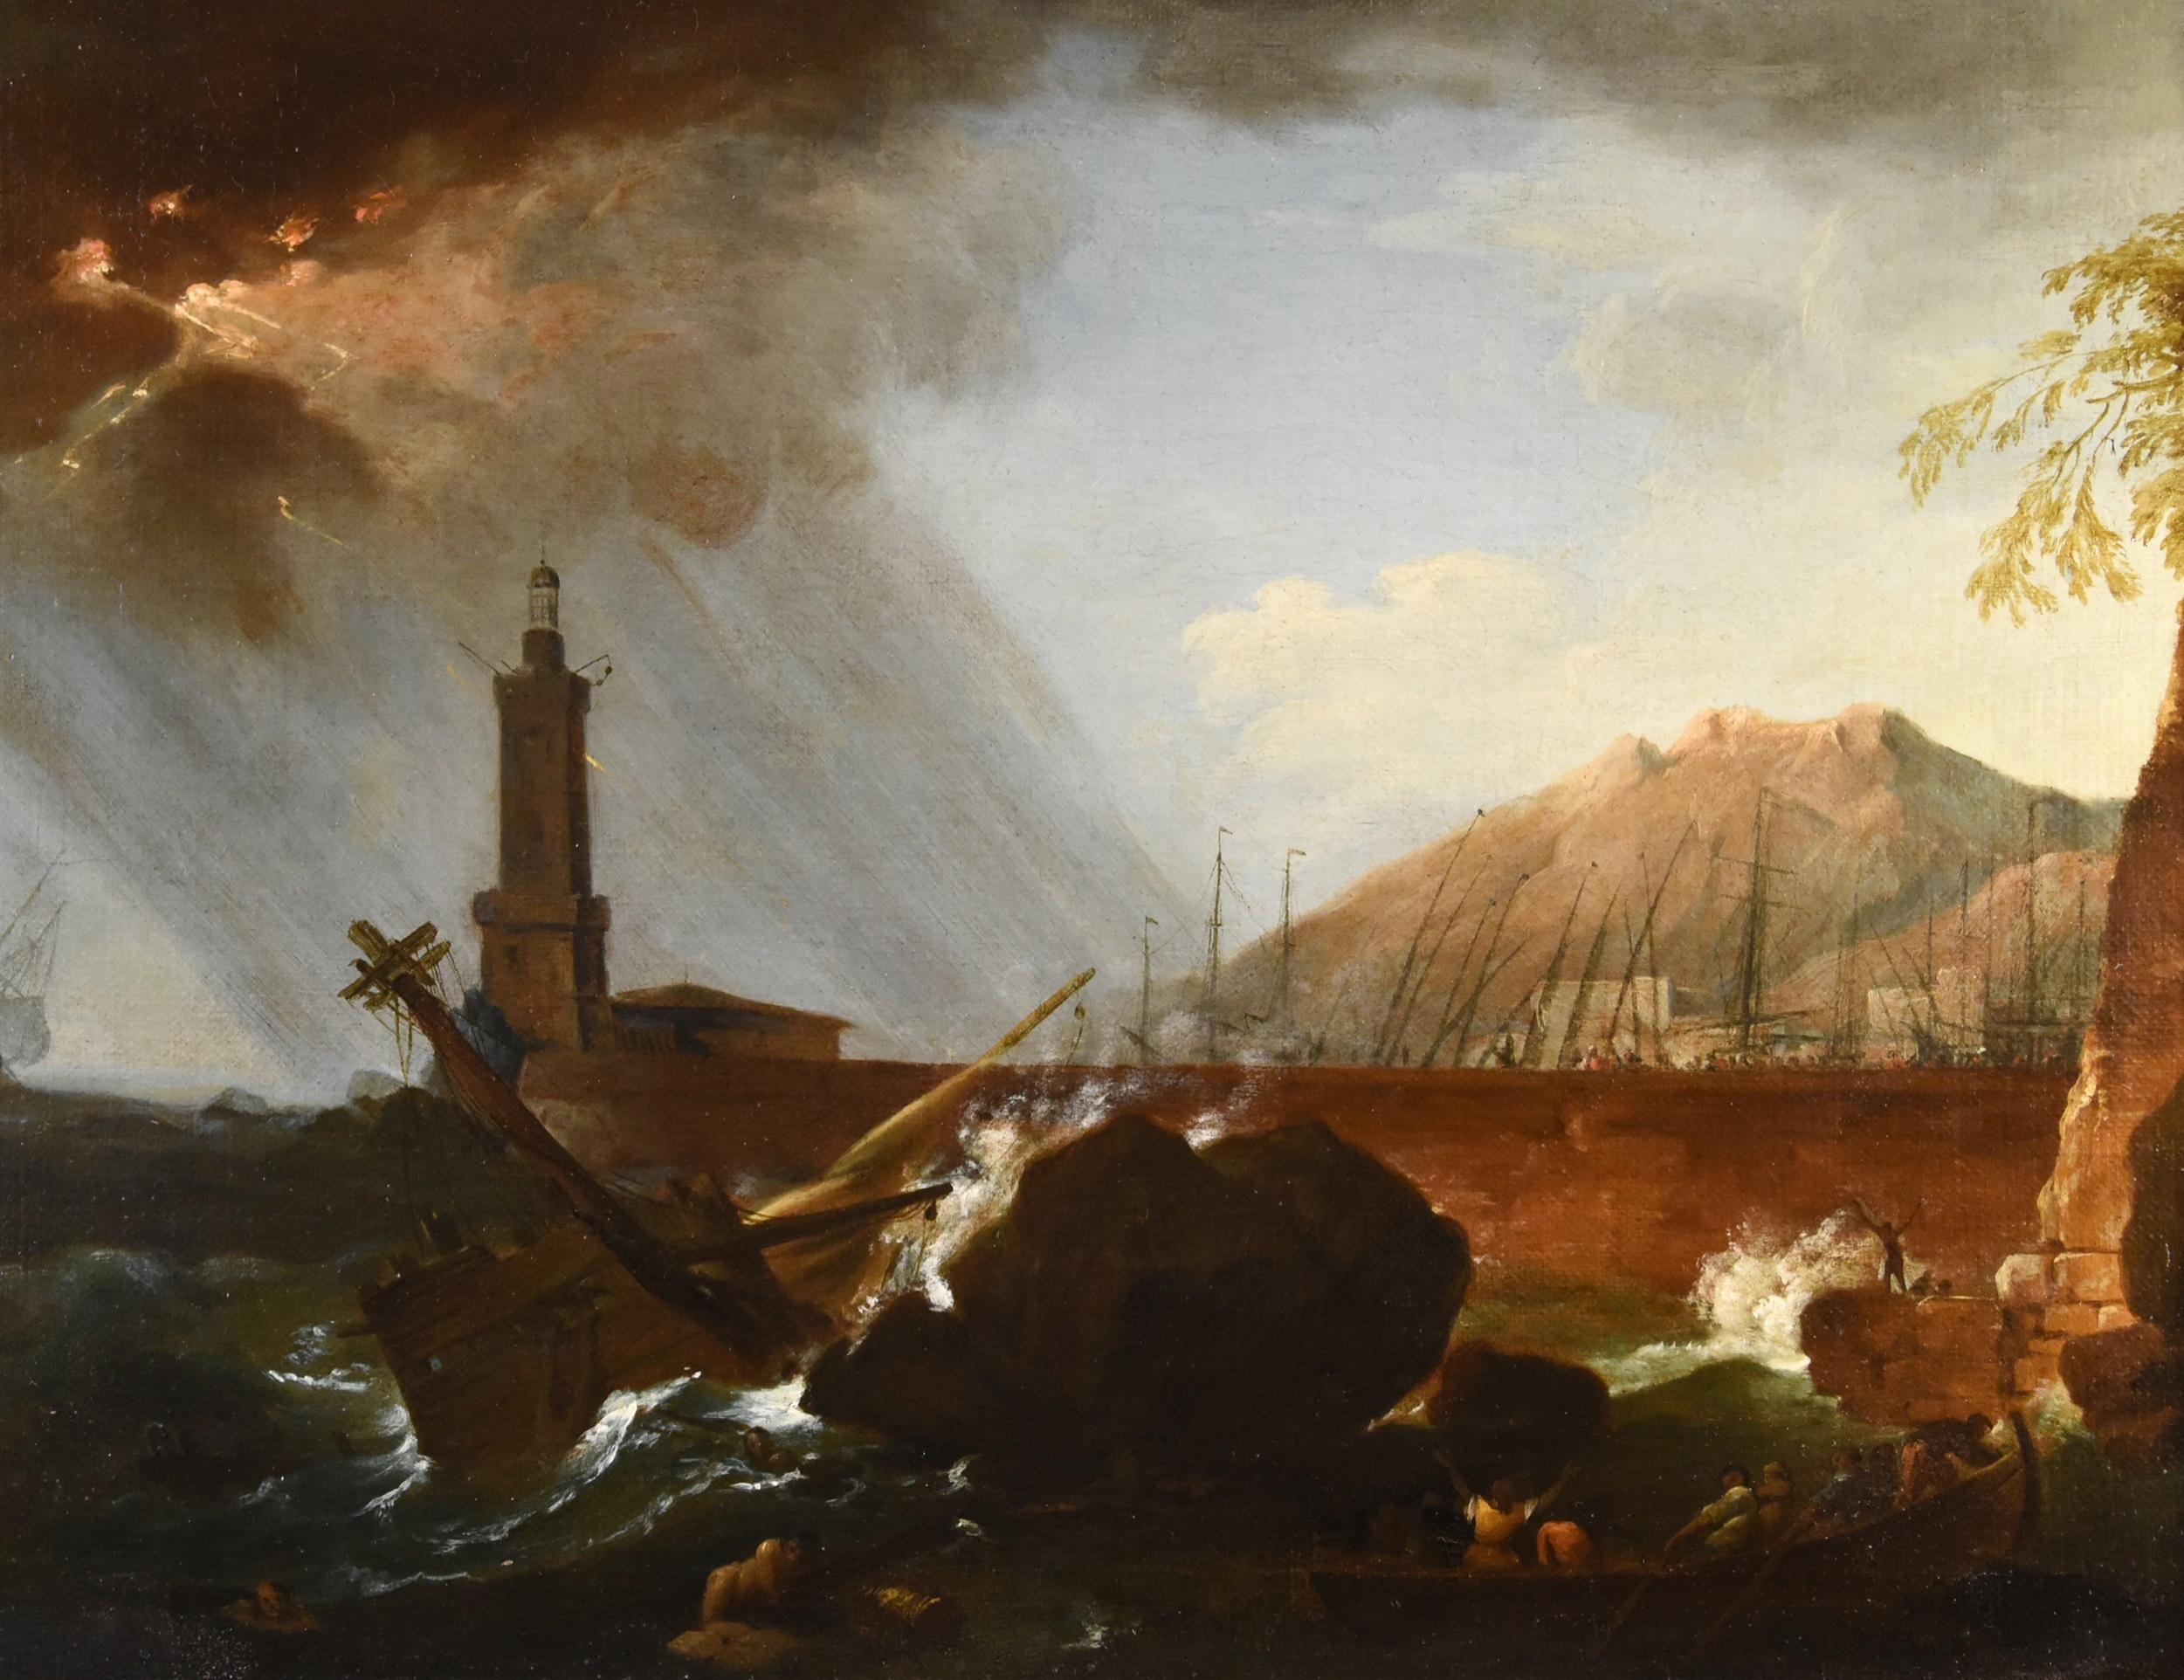 Storm See Water Landscape Vernet 18th Century Paint Oil on canvas Old master  - Old Masters Painting by Claude-joseph Vernet (avignon, 1714 - Paris, 1789)